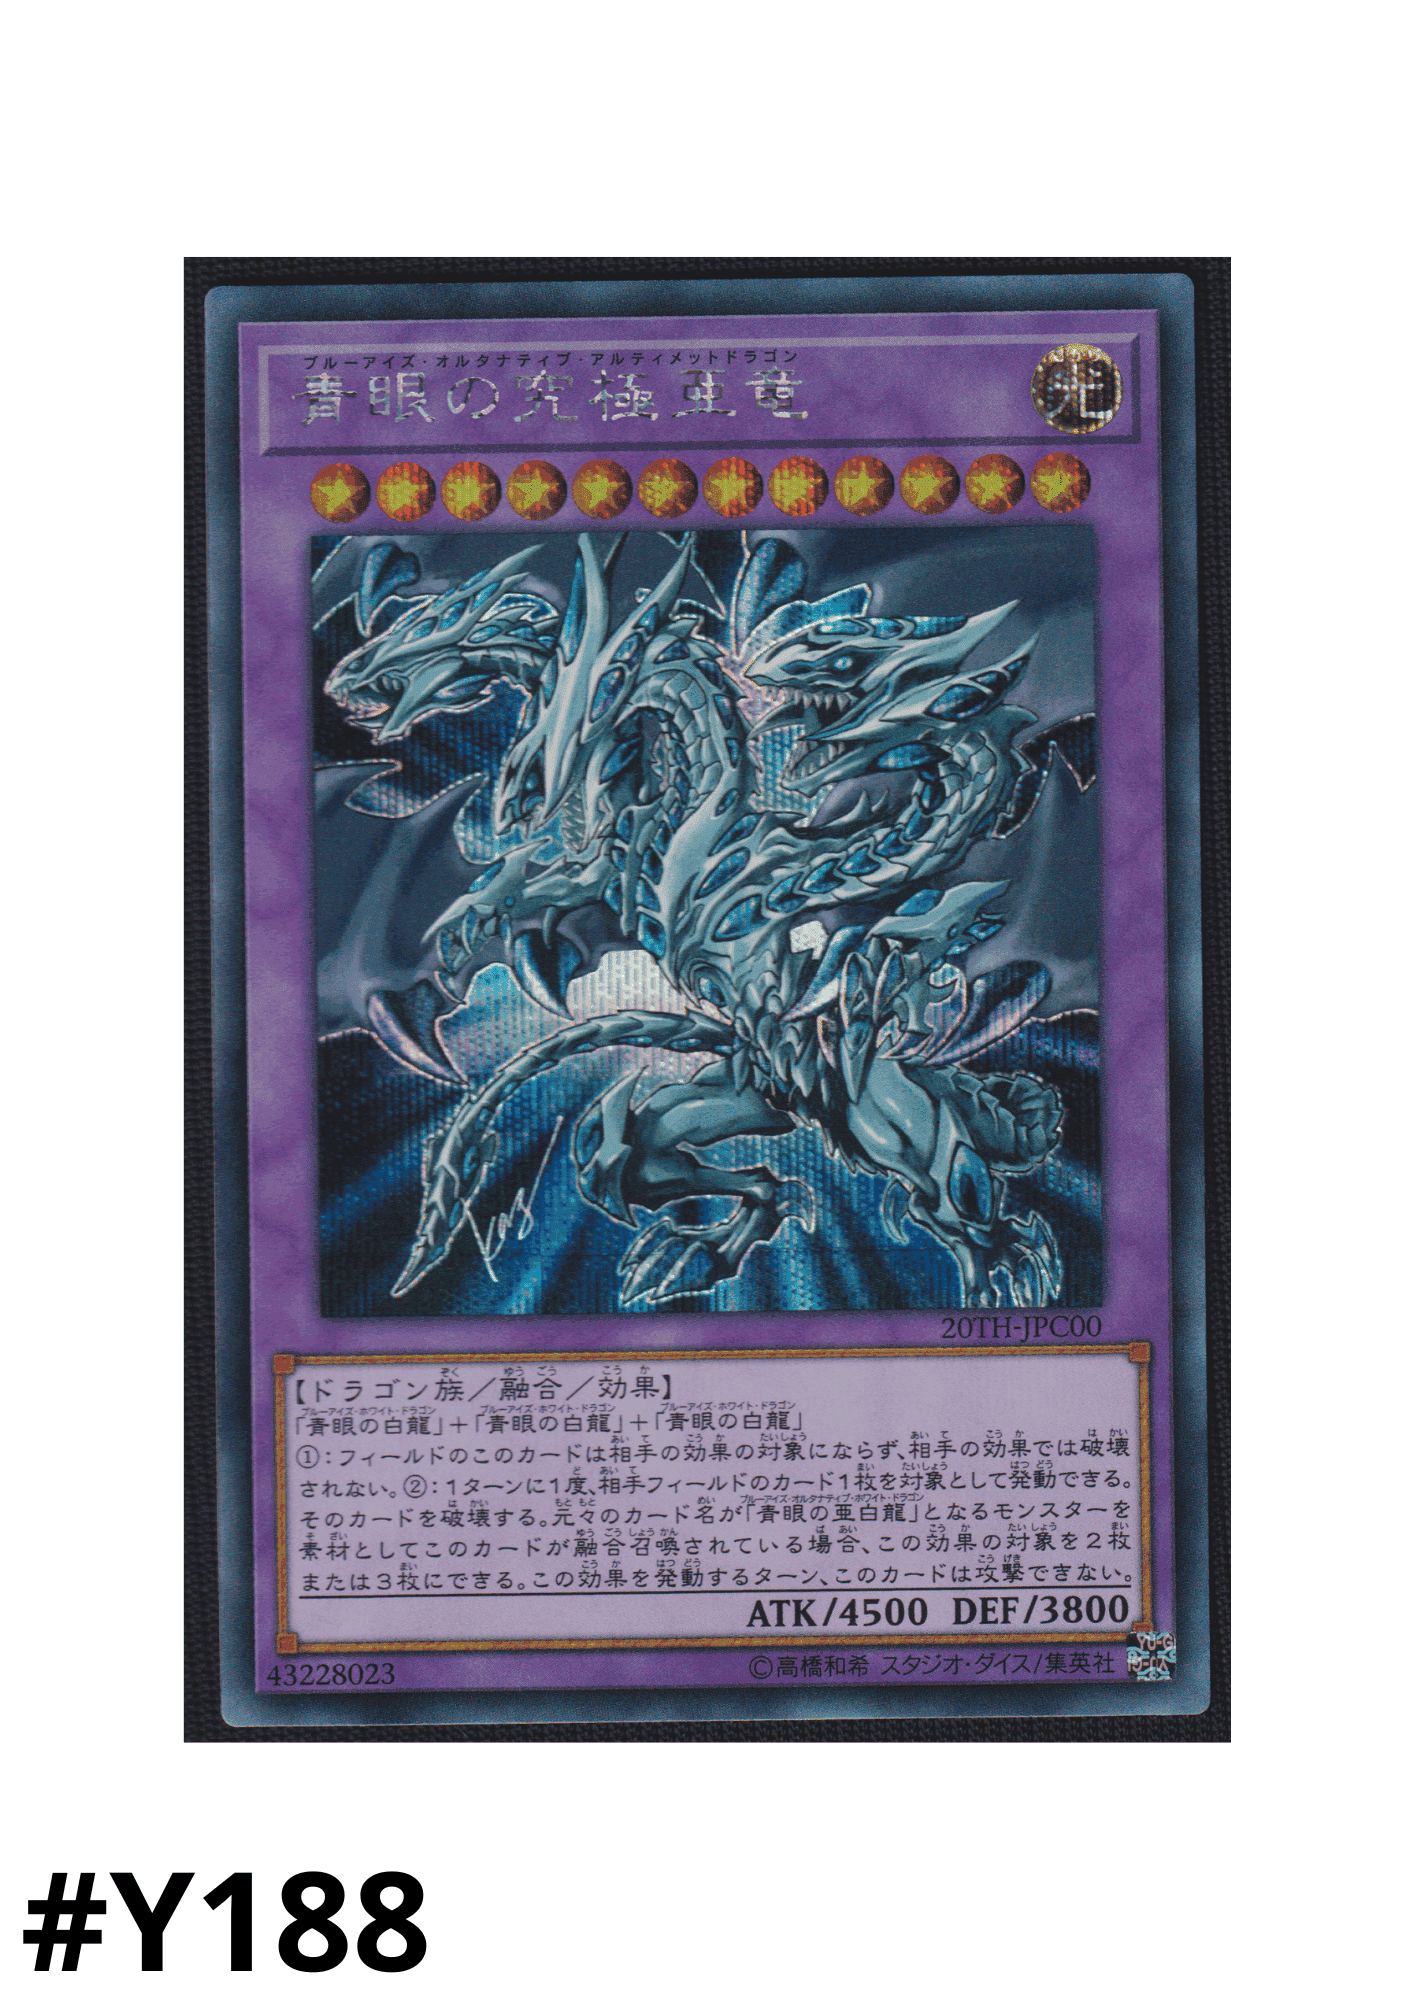 Blue-Eyes Alternative Ultimate Dragon 20TH-JPC00  |  20th ANNIVERSARY LEGEND COLLECTION ChitoroShop